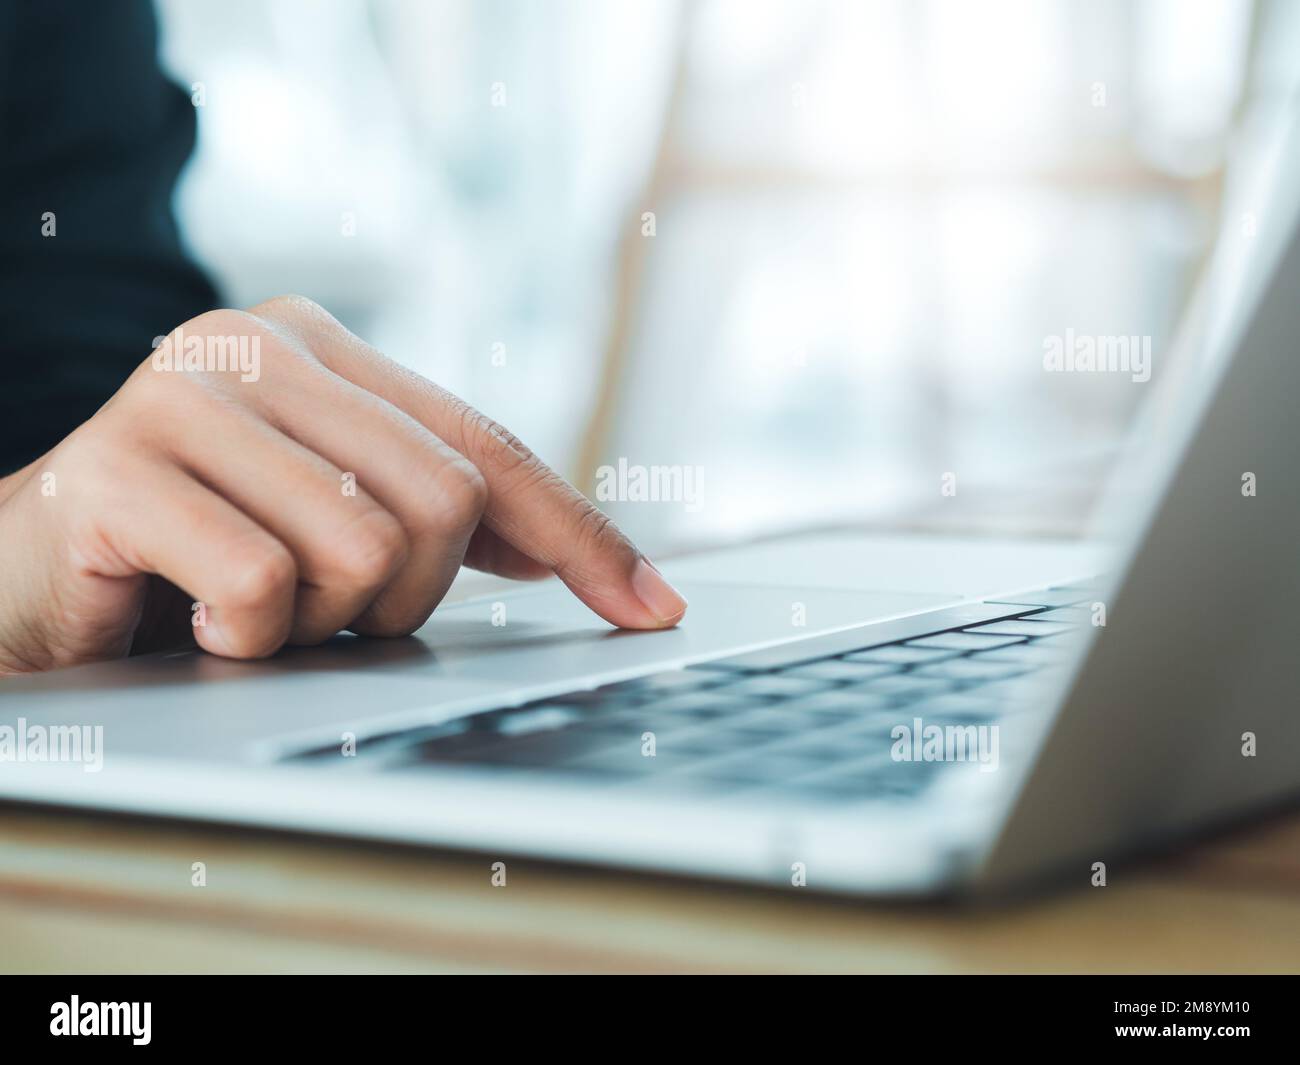 Close-up finger of business person in suit touch on touchpad on laptop computer. Working on notebook, business technology concept. Control your digita Stock Photo